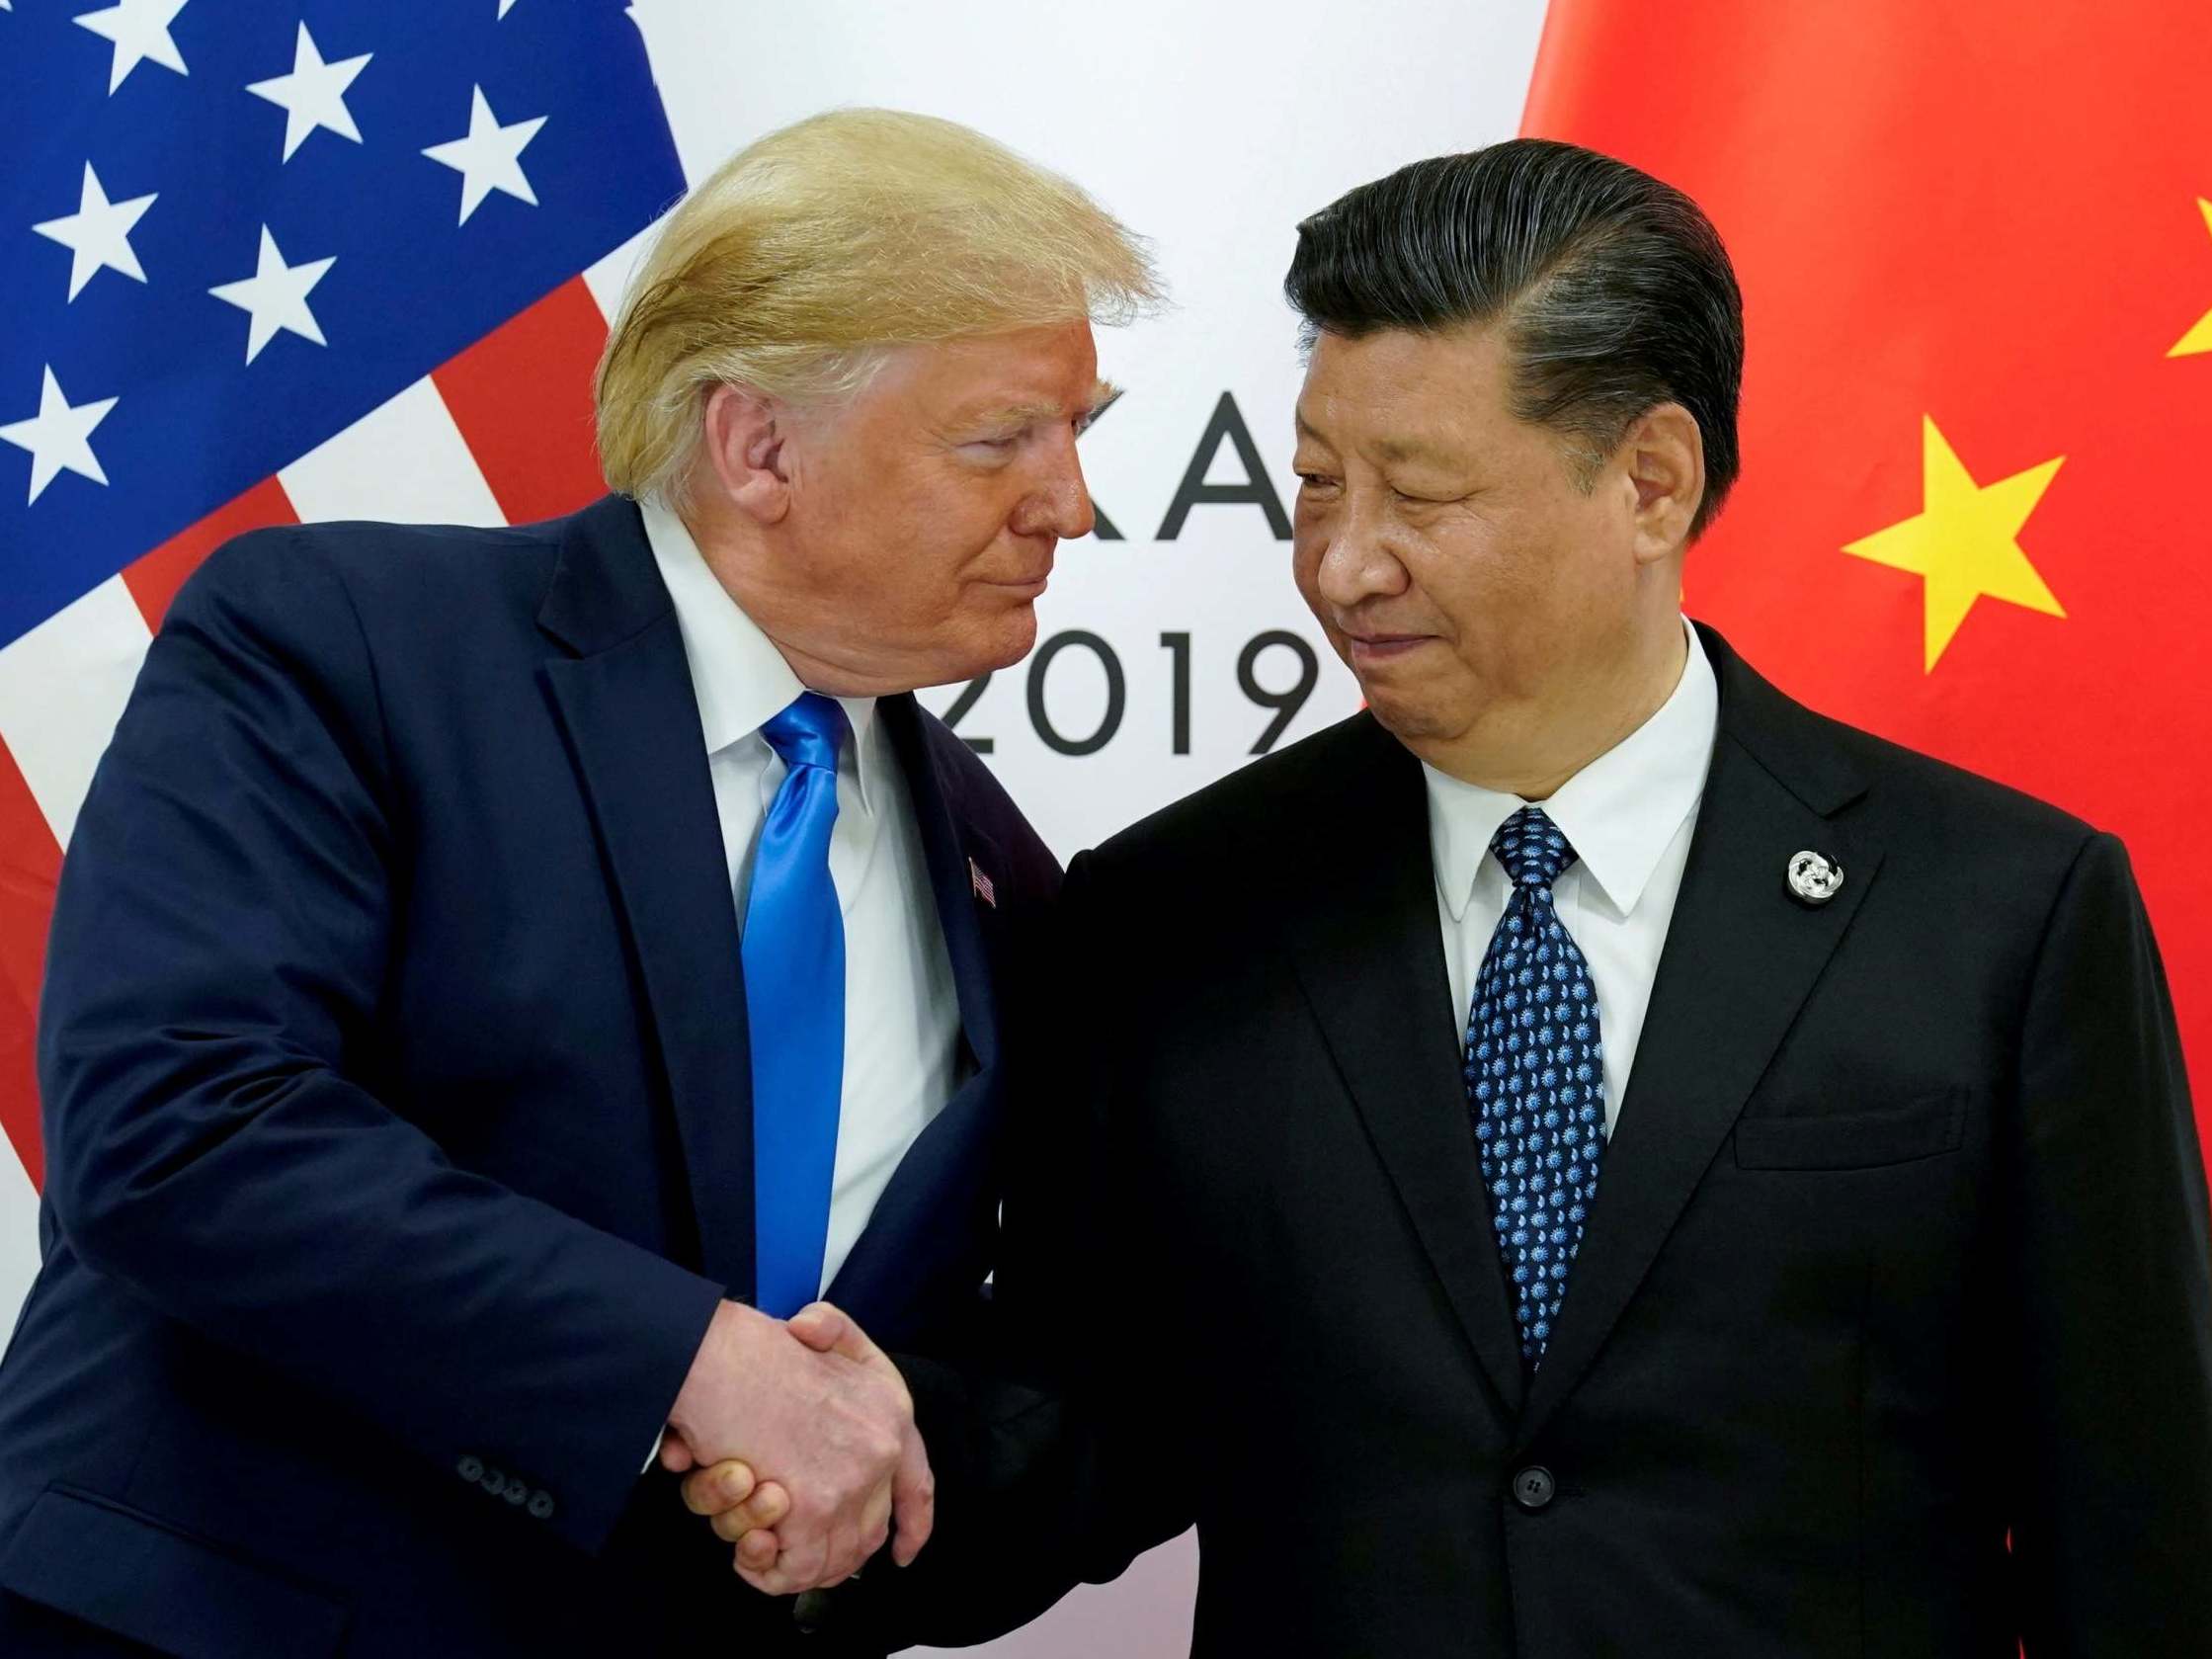 The deal offers a pathway to ending the year and a half long trade war between Beijing and Washington